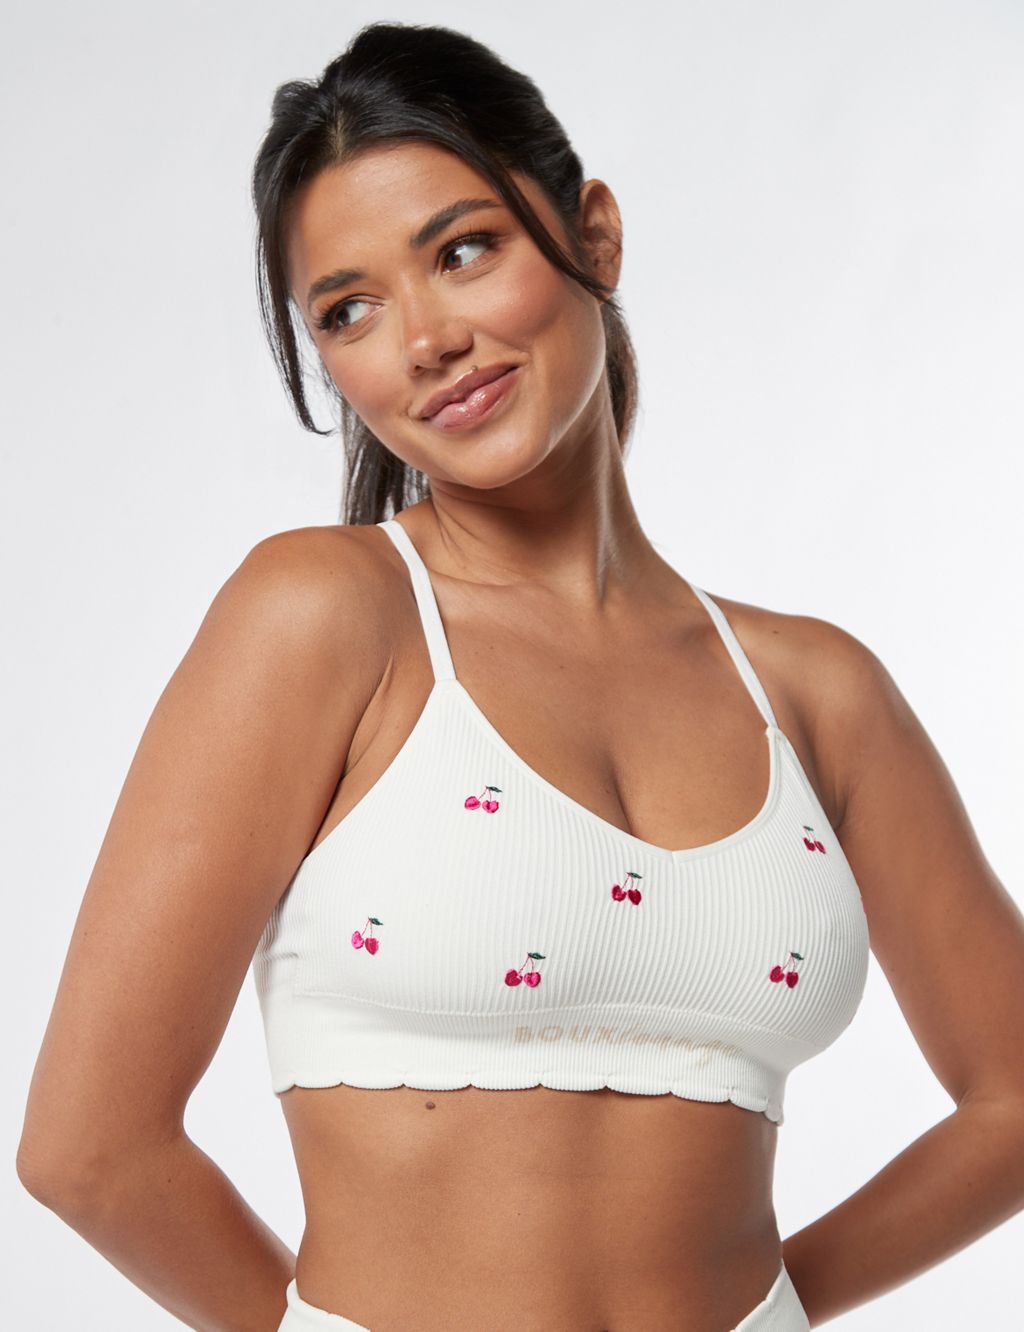 Embroidered bralets